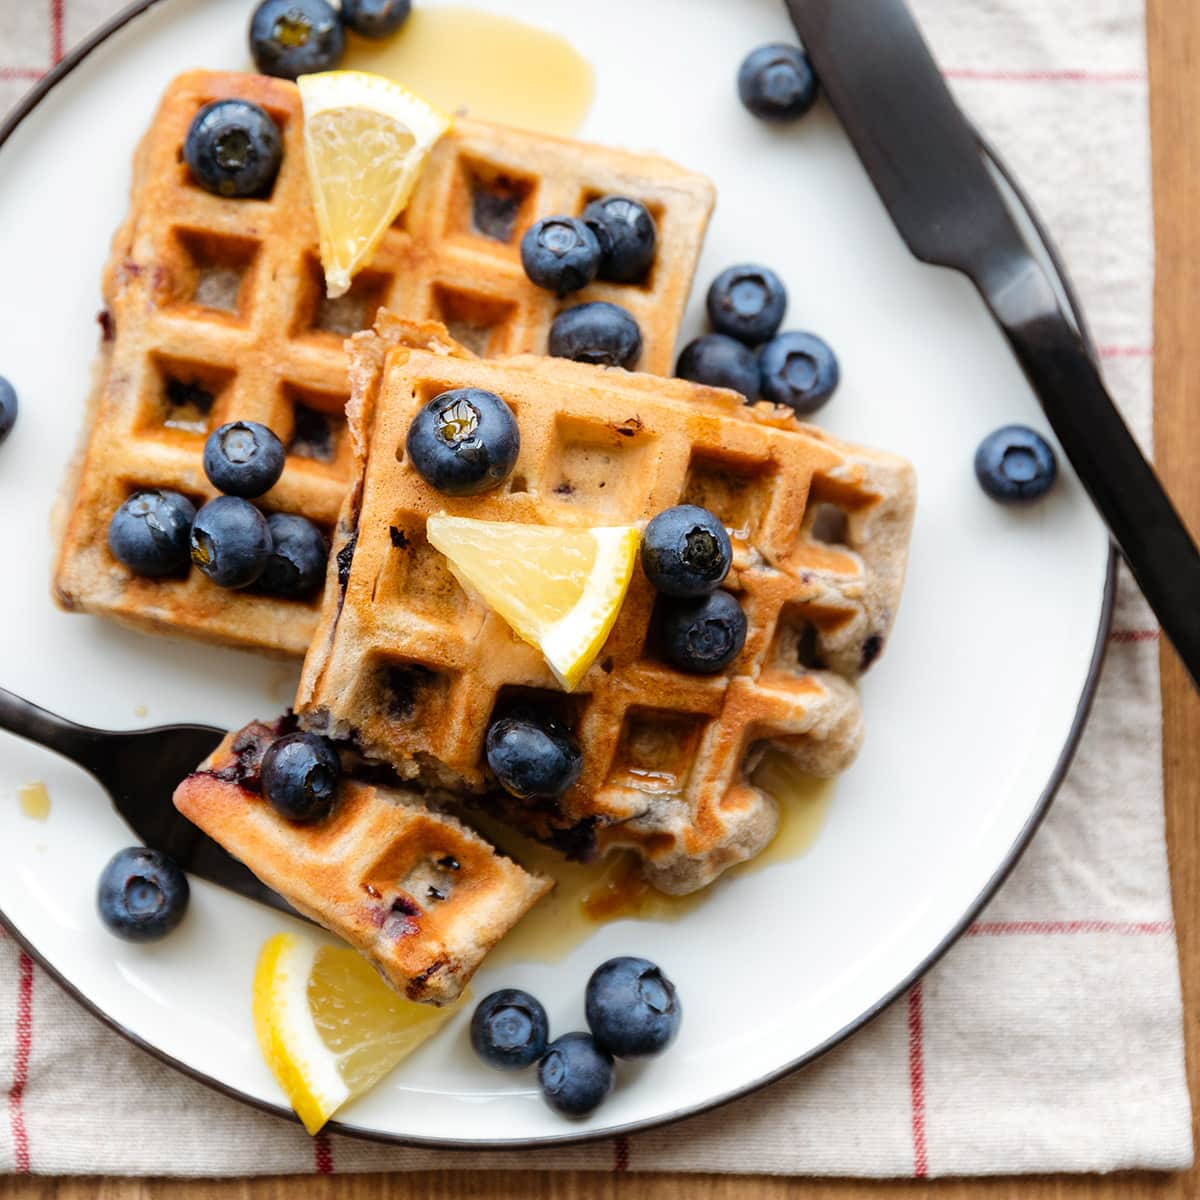 Waffles with blueberries and lemon slices on a white and black plates and a wooden table.